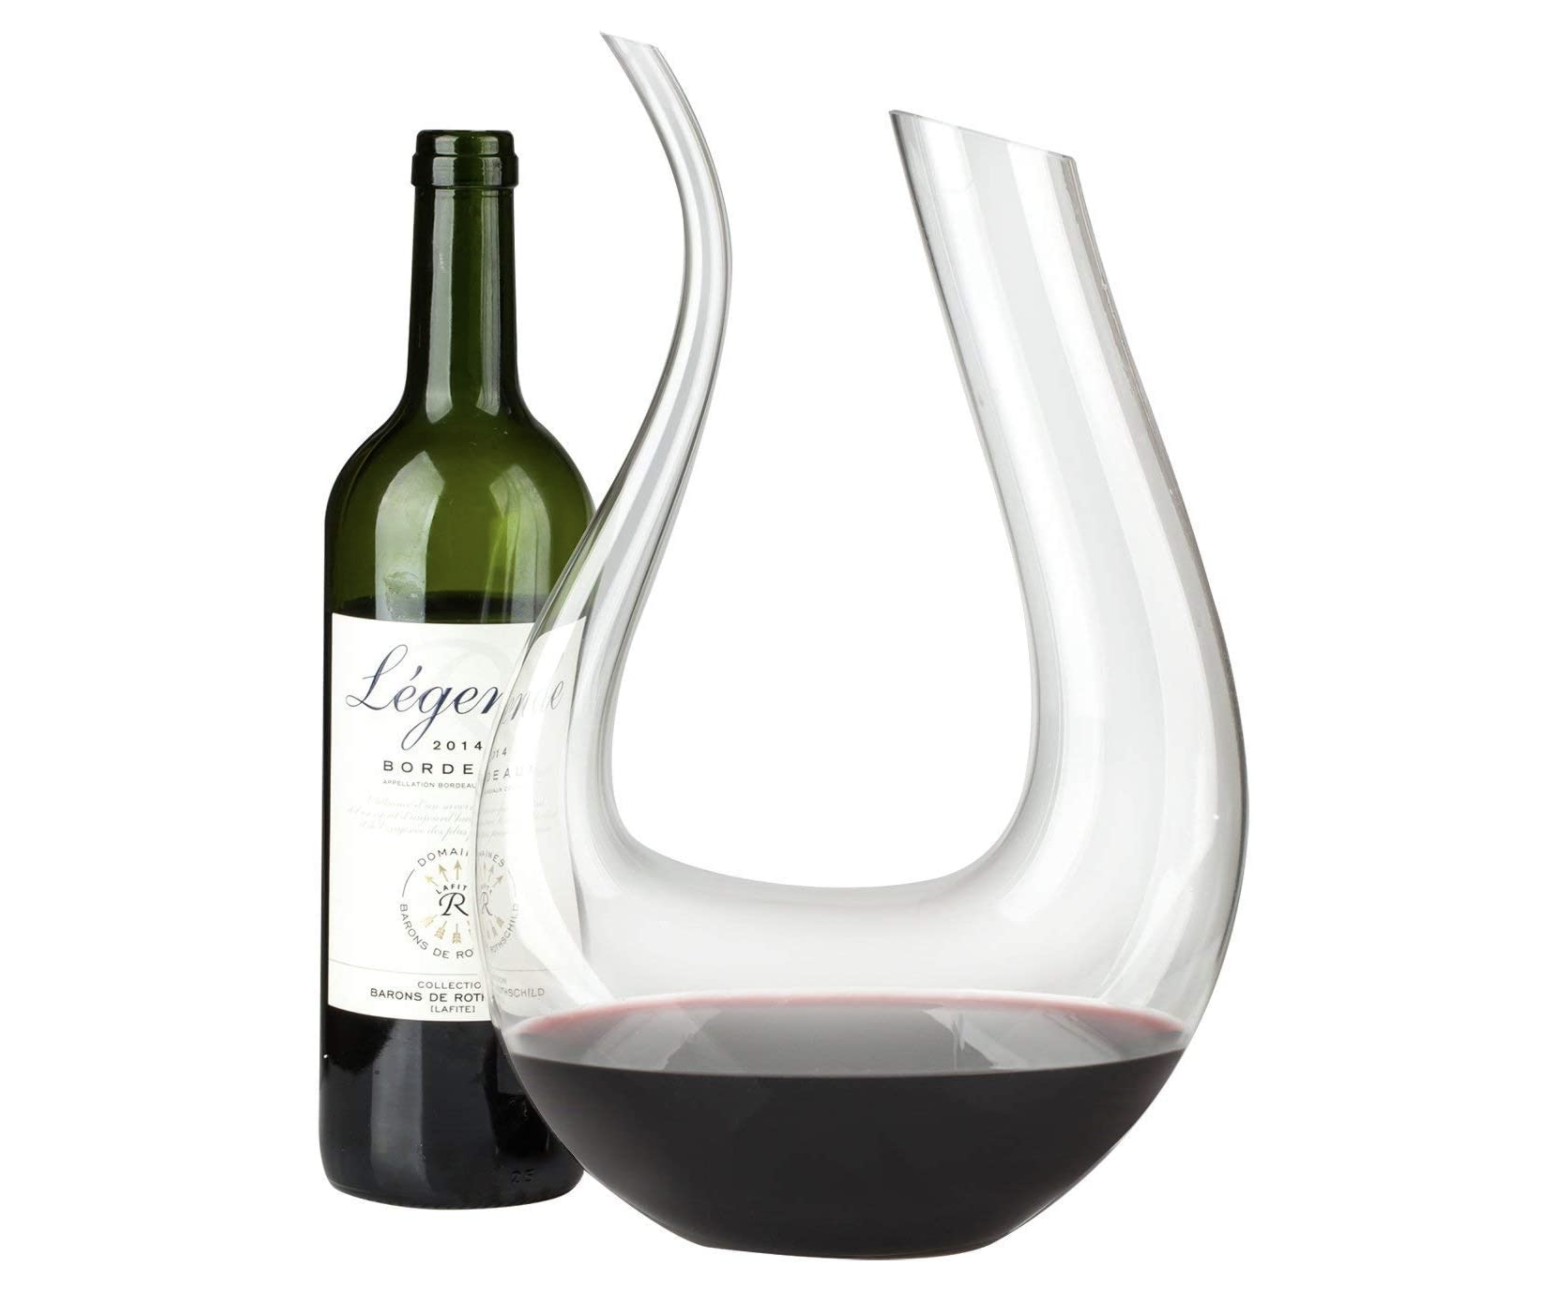 U shaped decanter with red wine